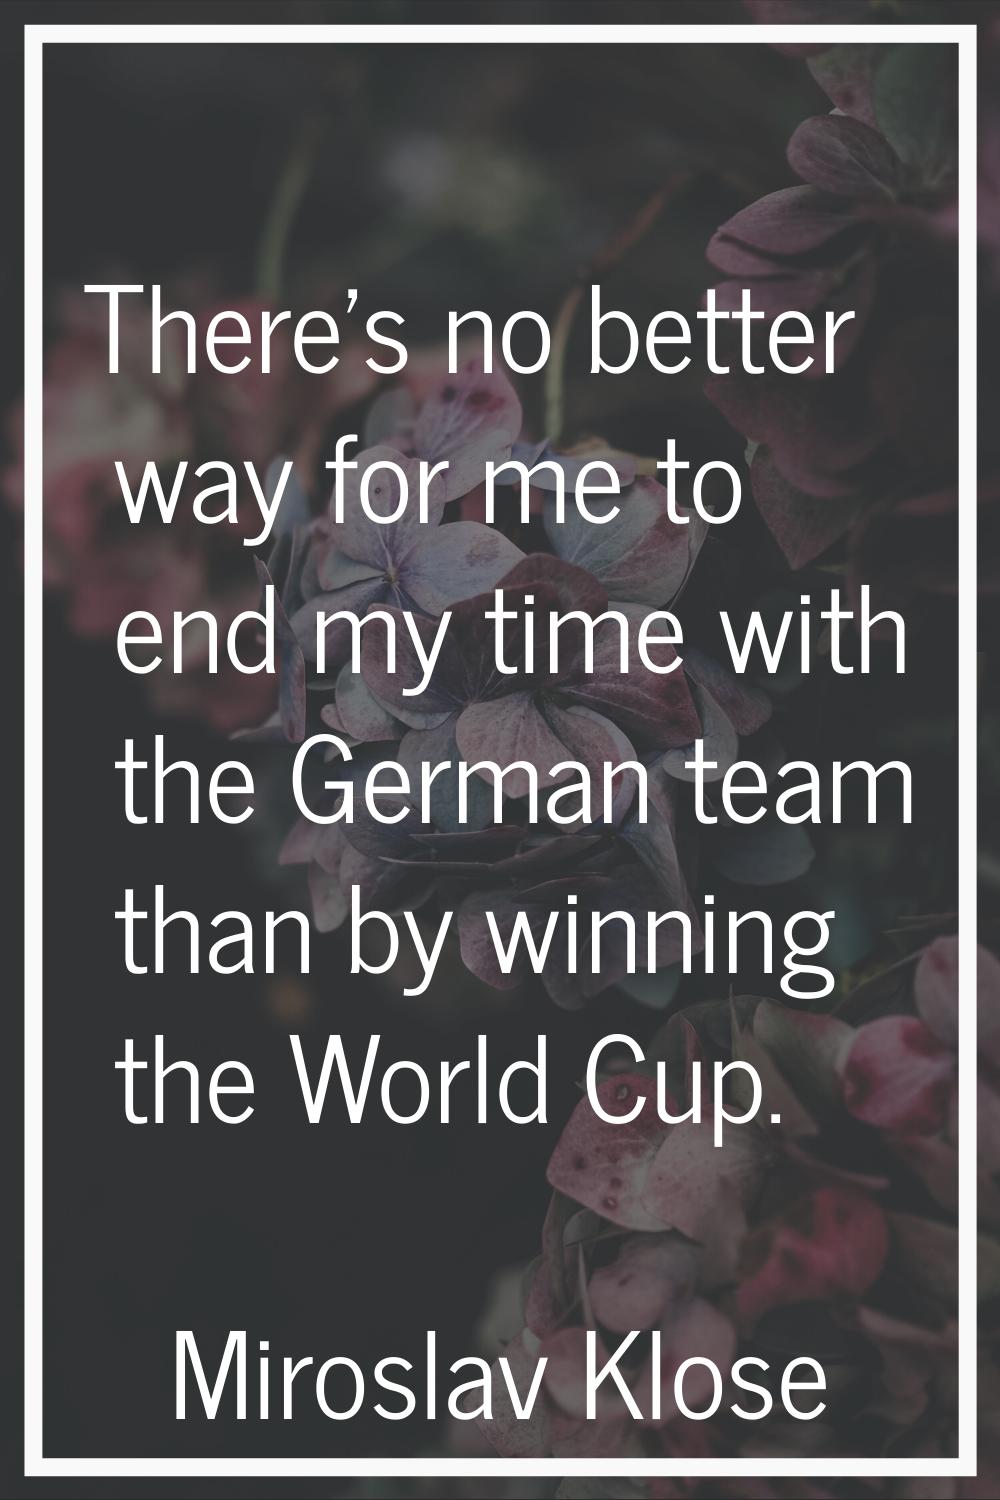 There's no better way for me to end my time with the German team than by winning the World Cup.